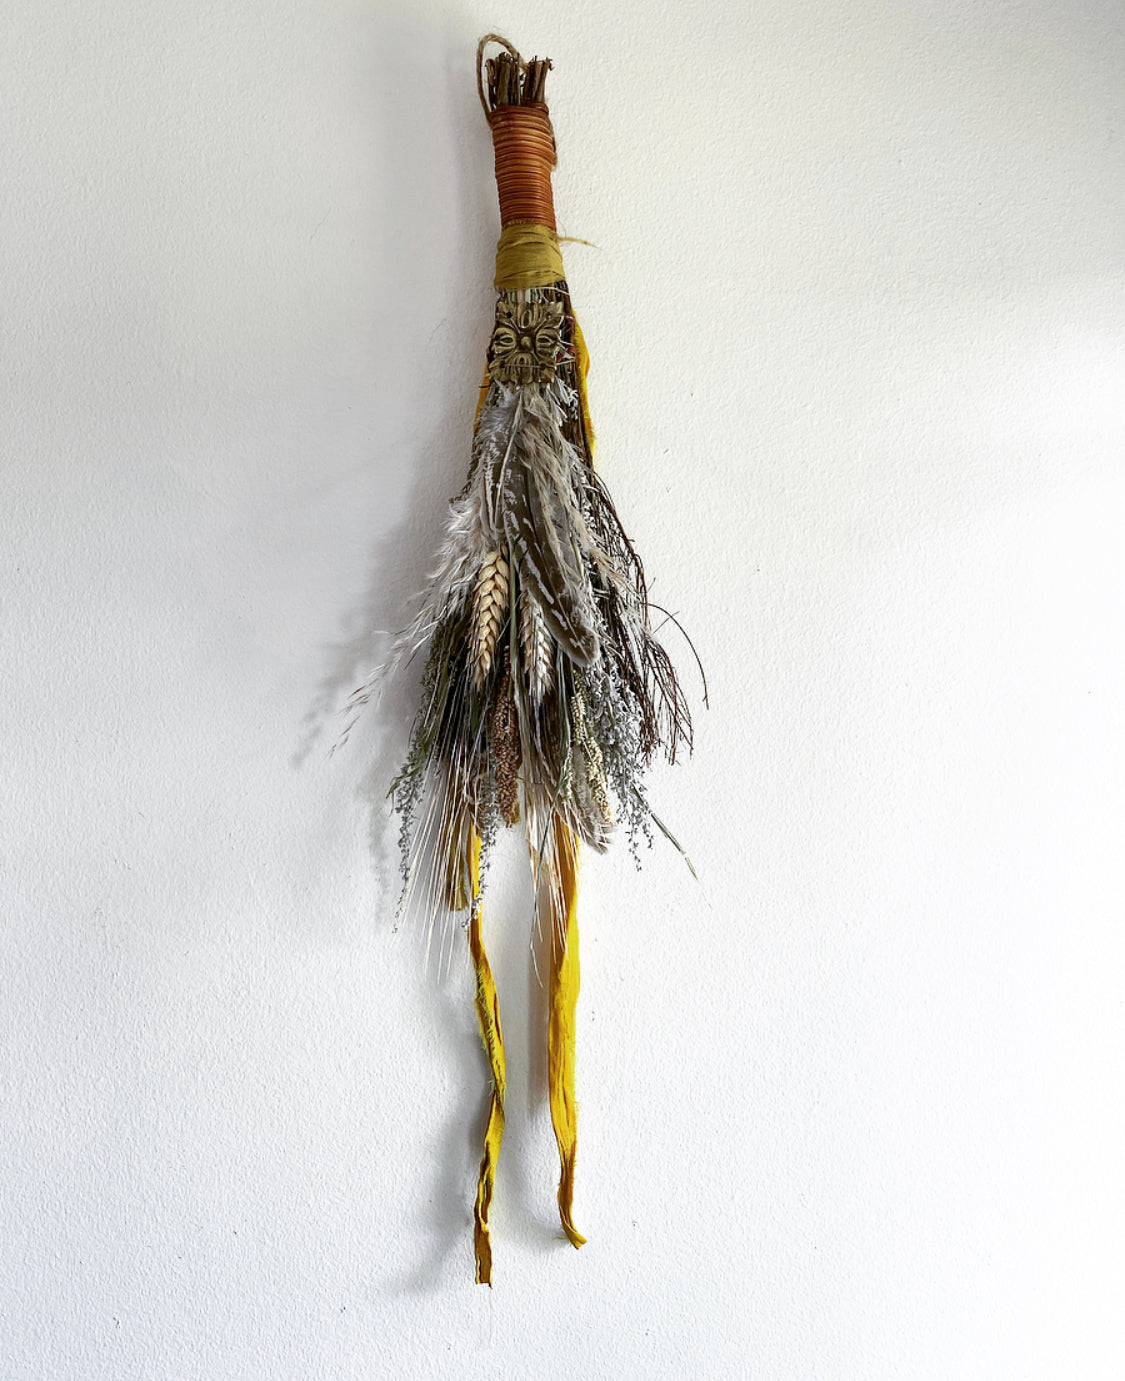 decorated broom for wall hangings, weddings, rustic decor